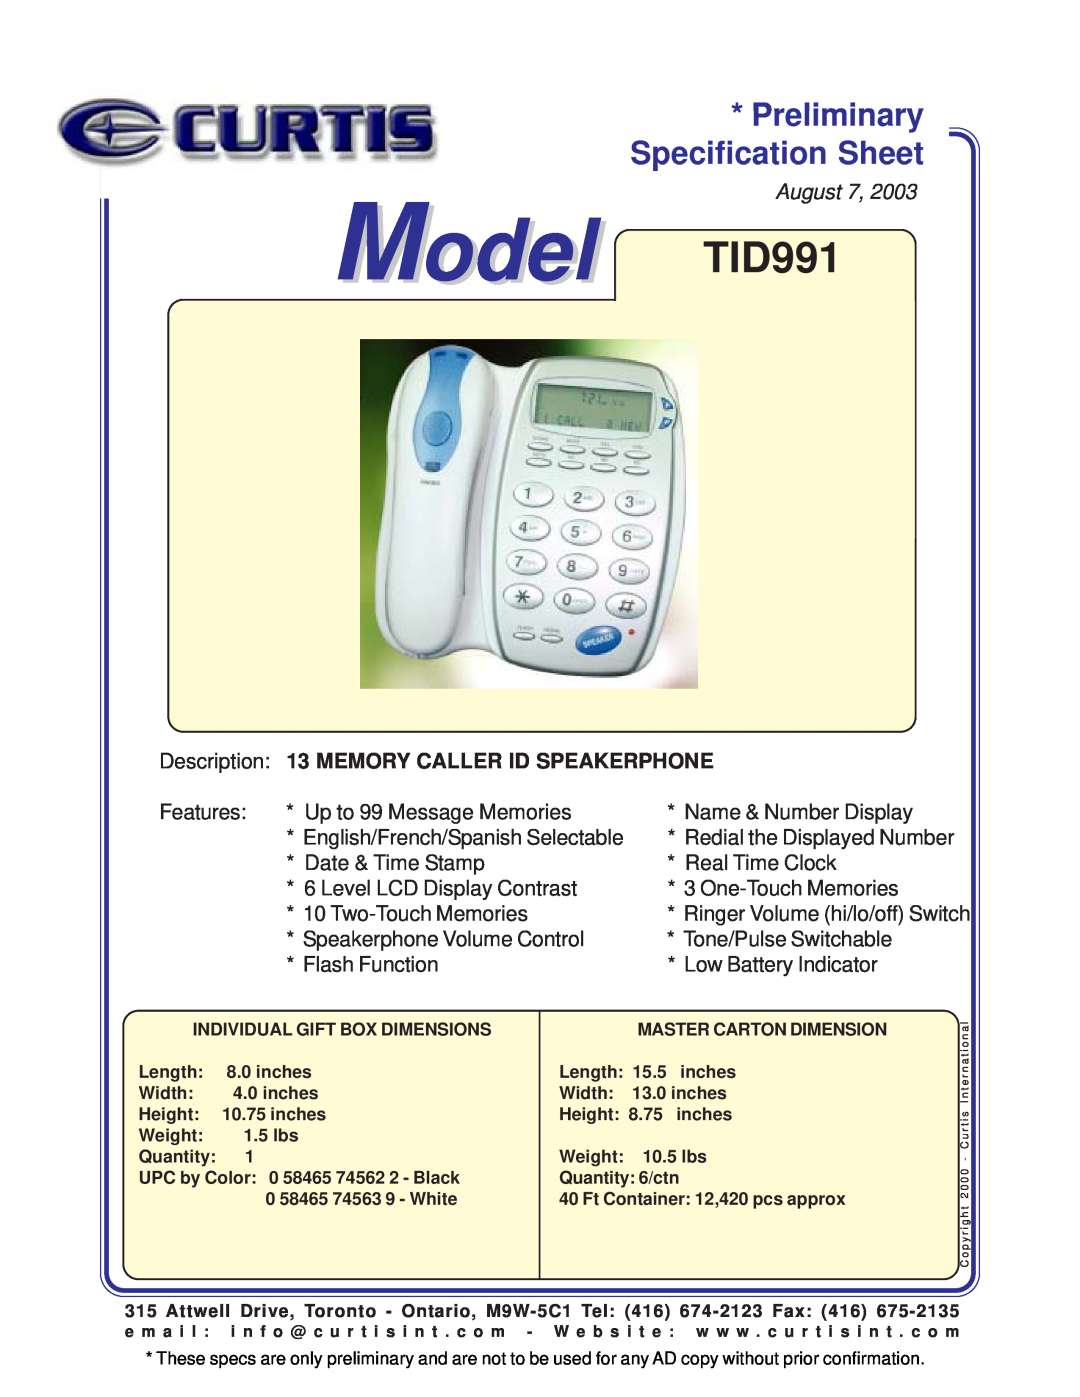 Curtis TID911 specifications Specification Sheet, Model TID991, Preliminary, August 7, Memory Caller Id Speakerphone 